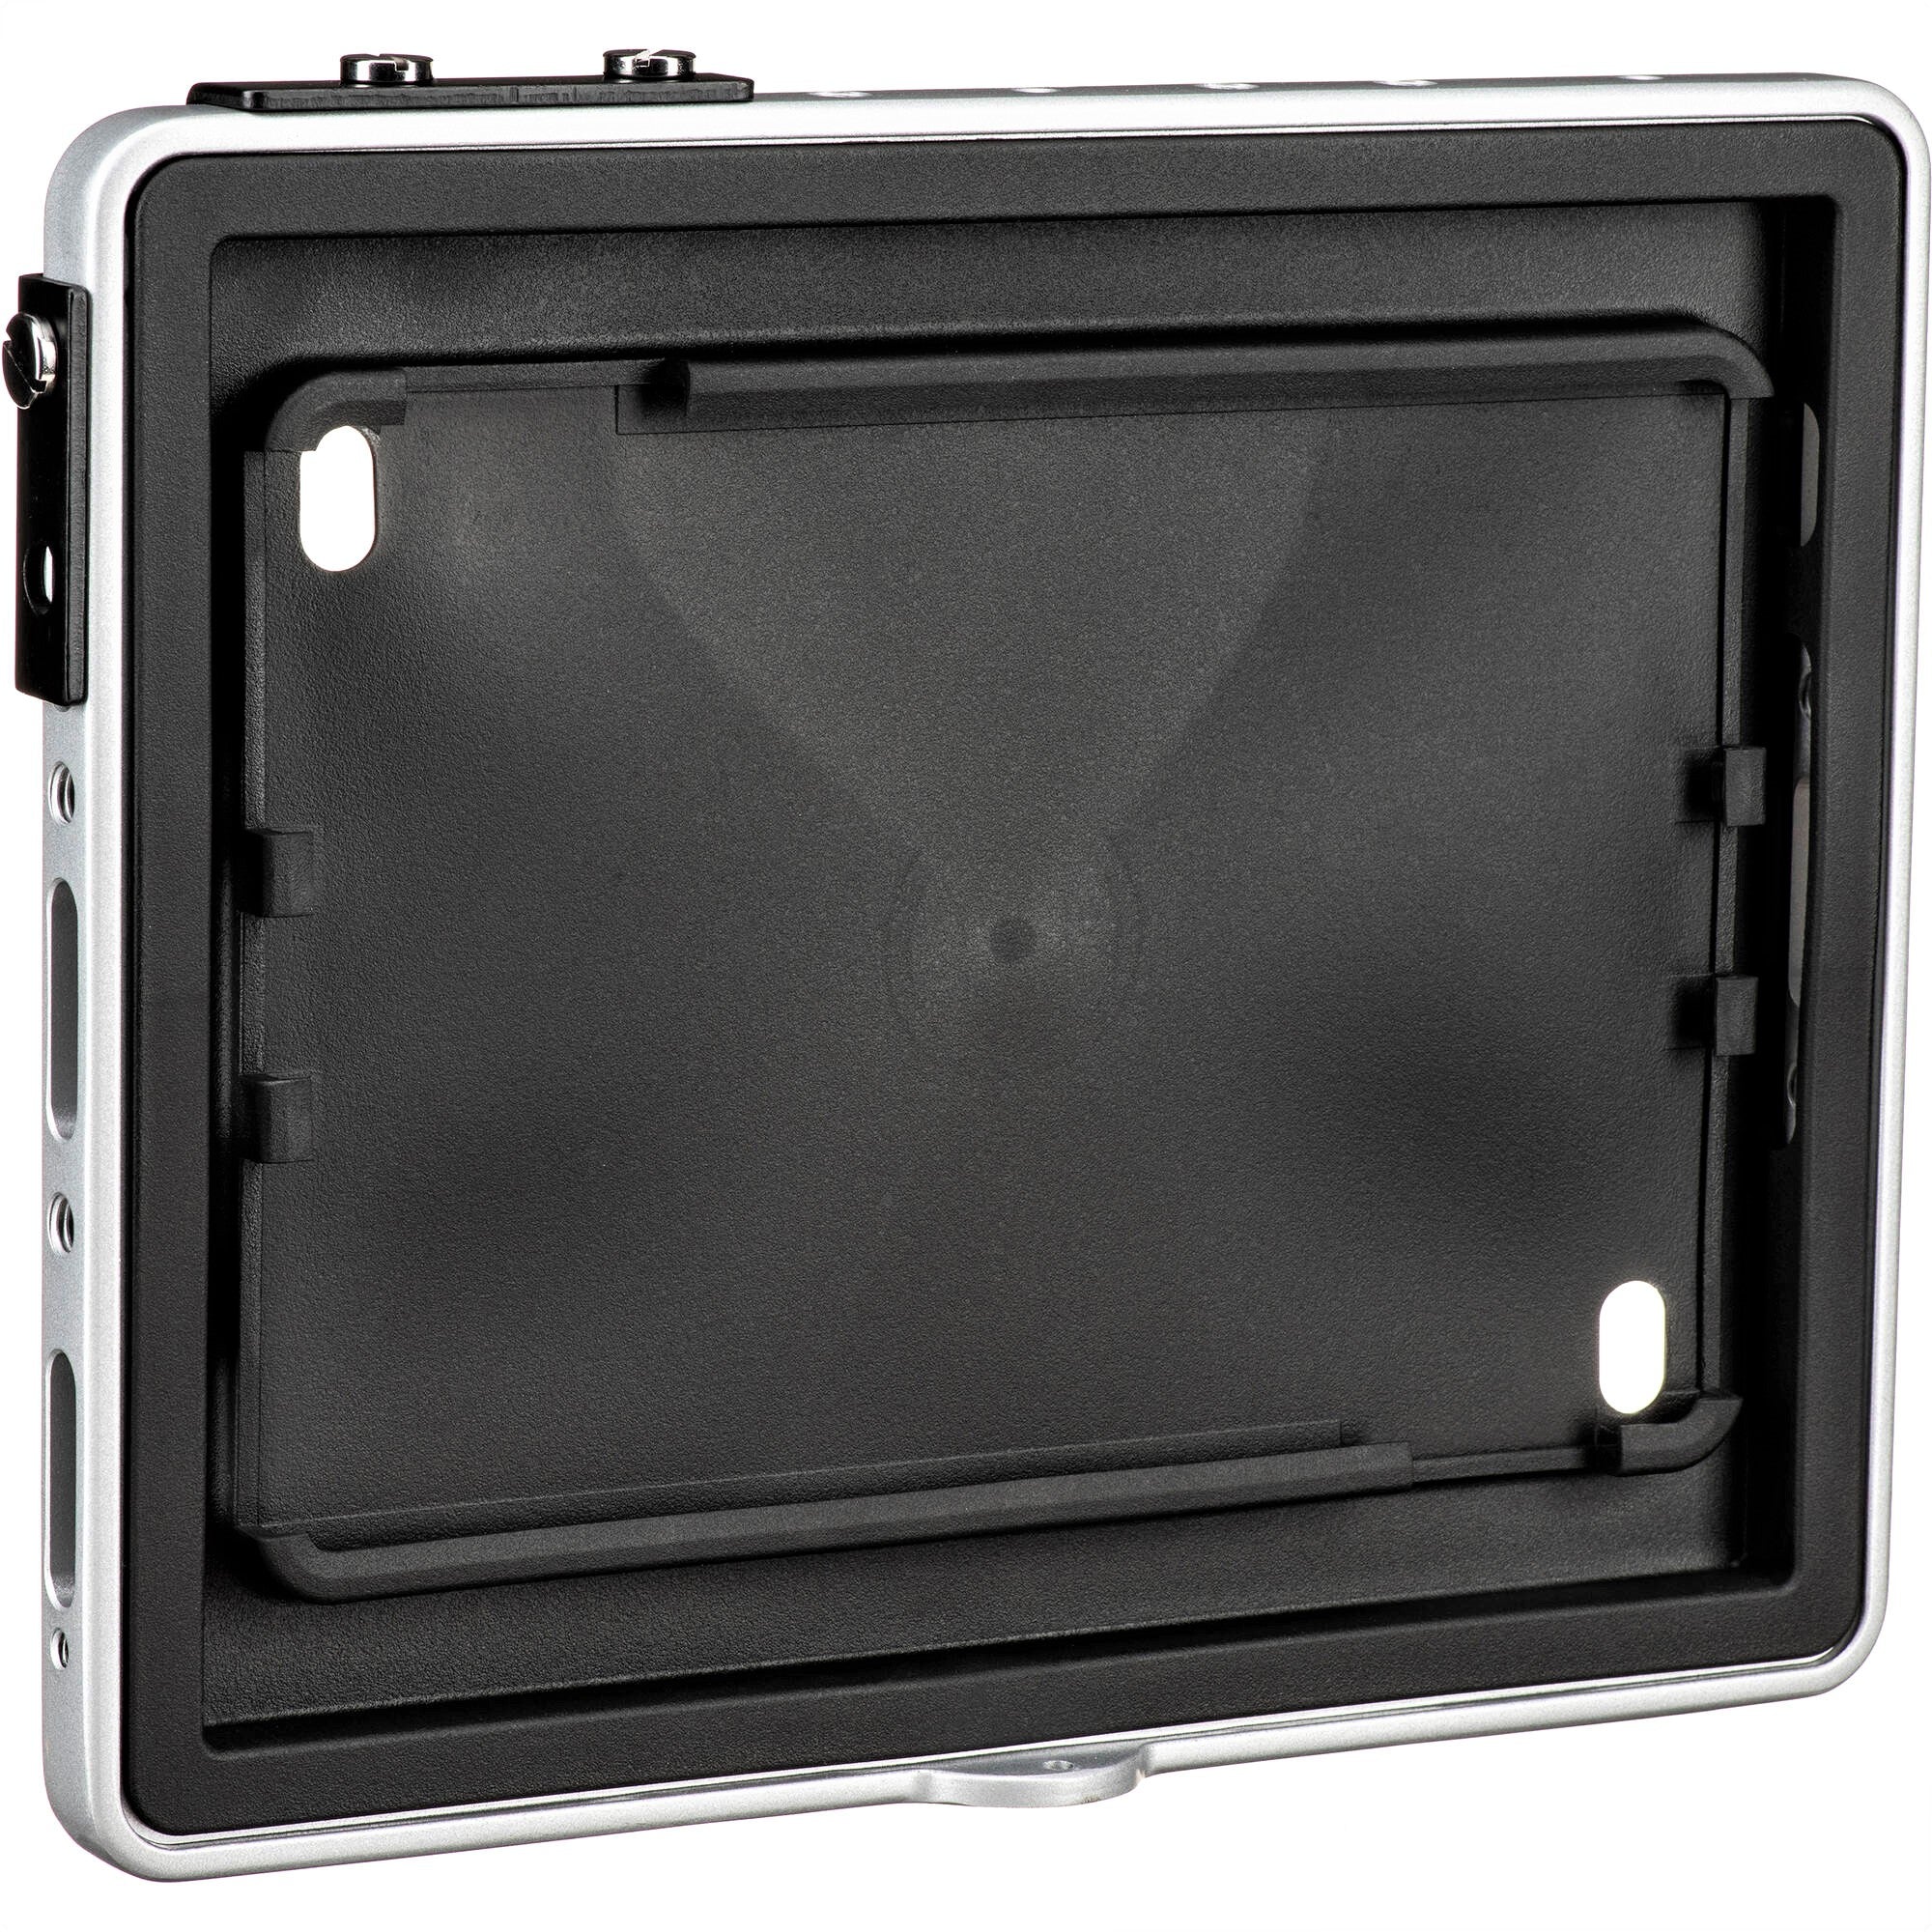 Padcaster Case for iPad 7th Gen 10.2 in a Front View